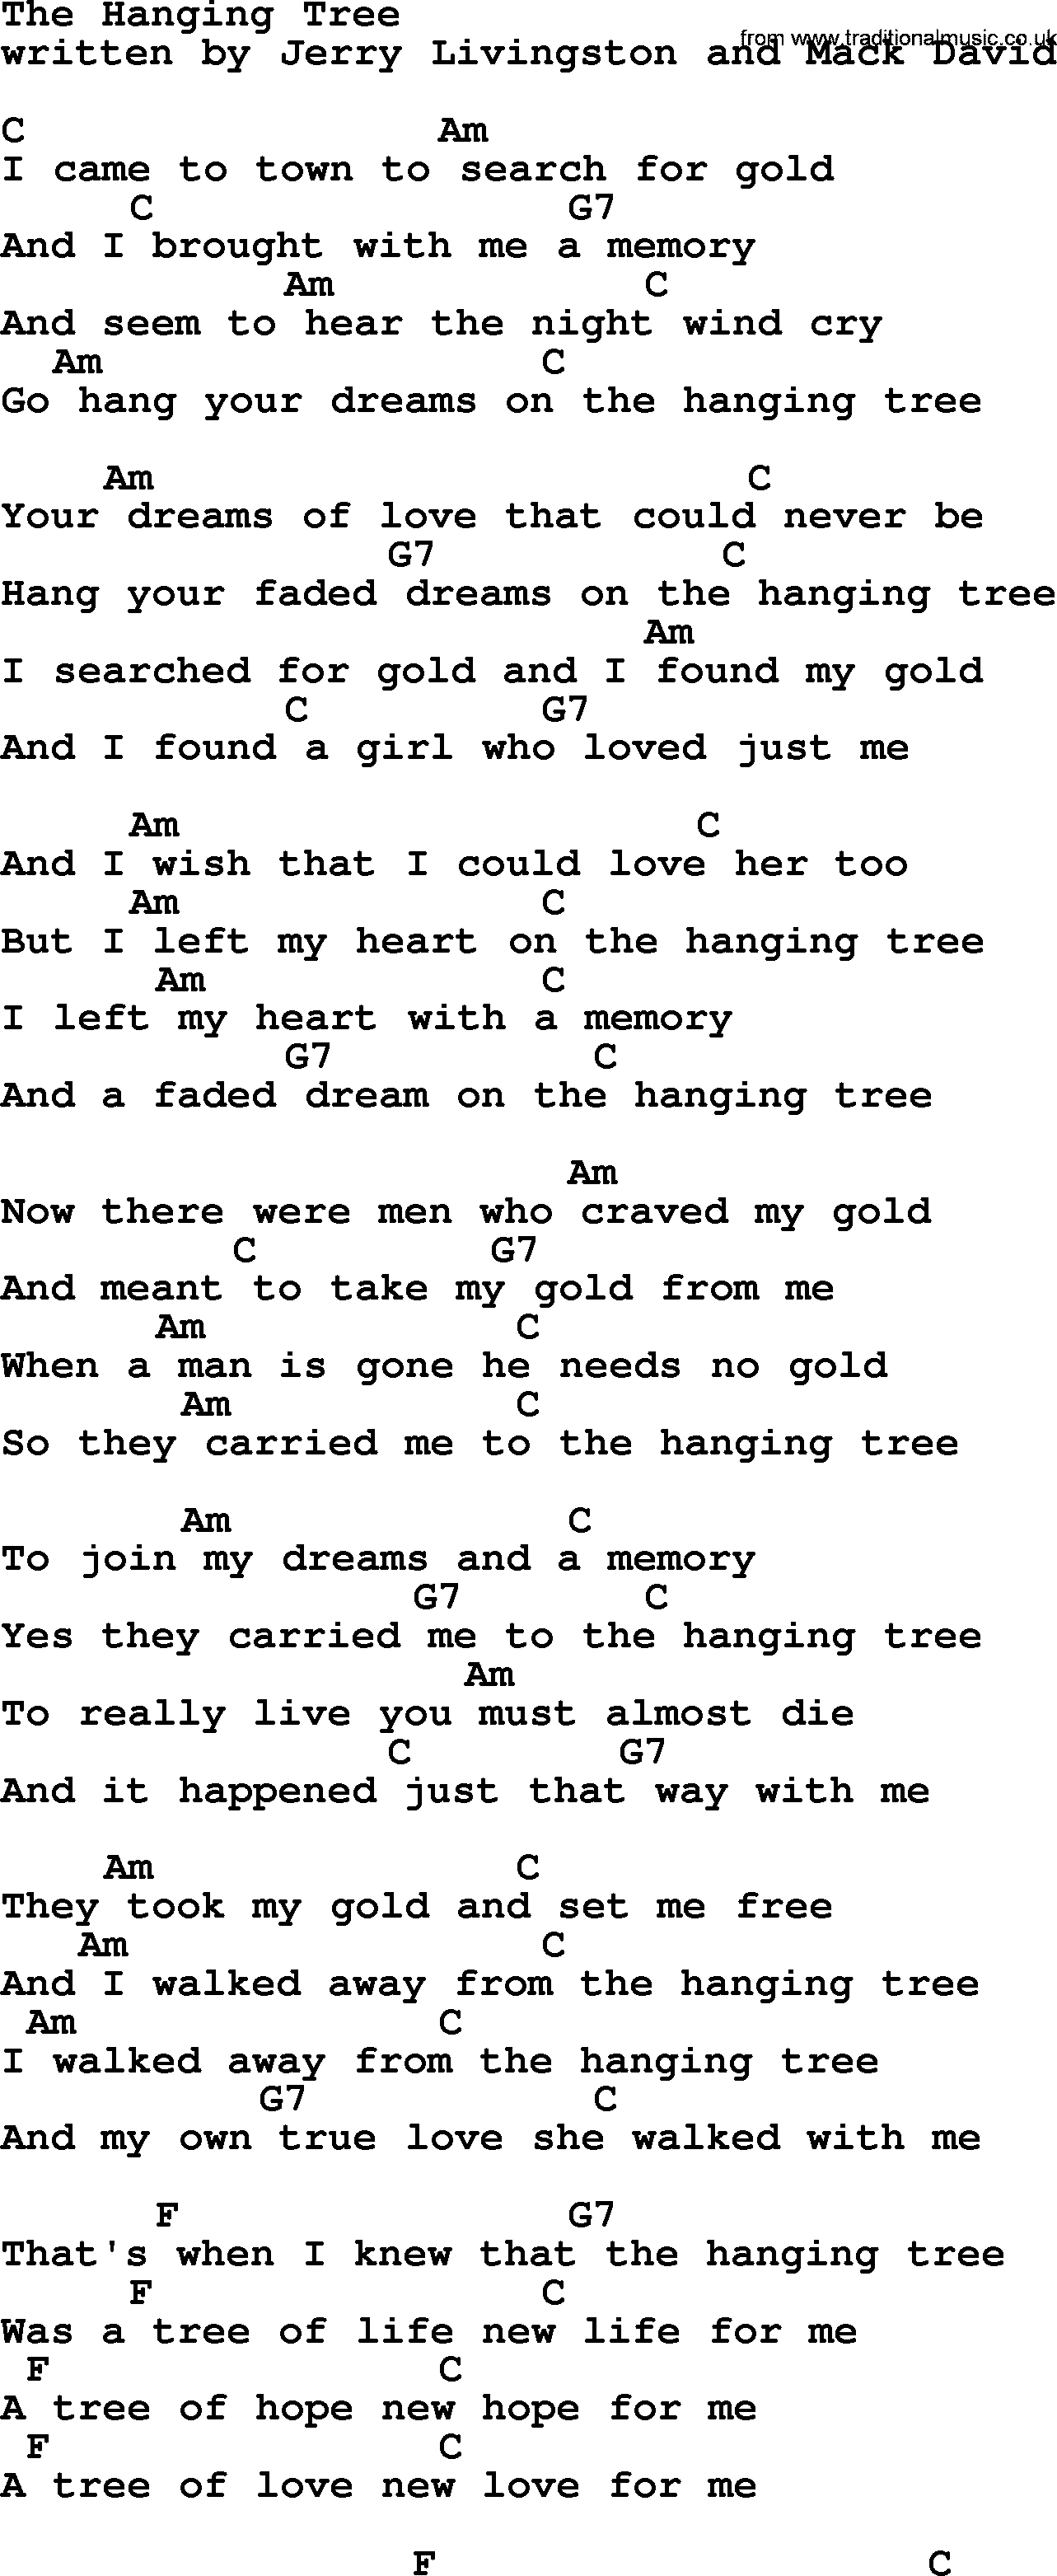 Marty Robbins song: The Hanging Tree, lyrics and chords